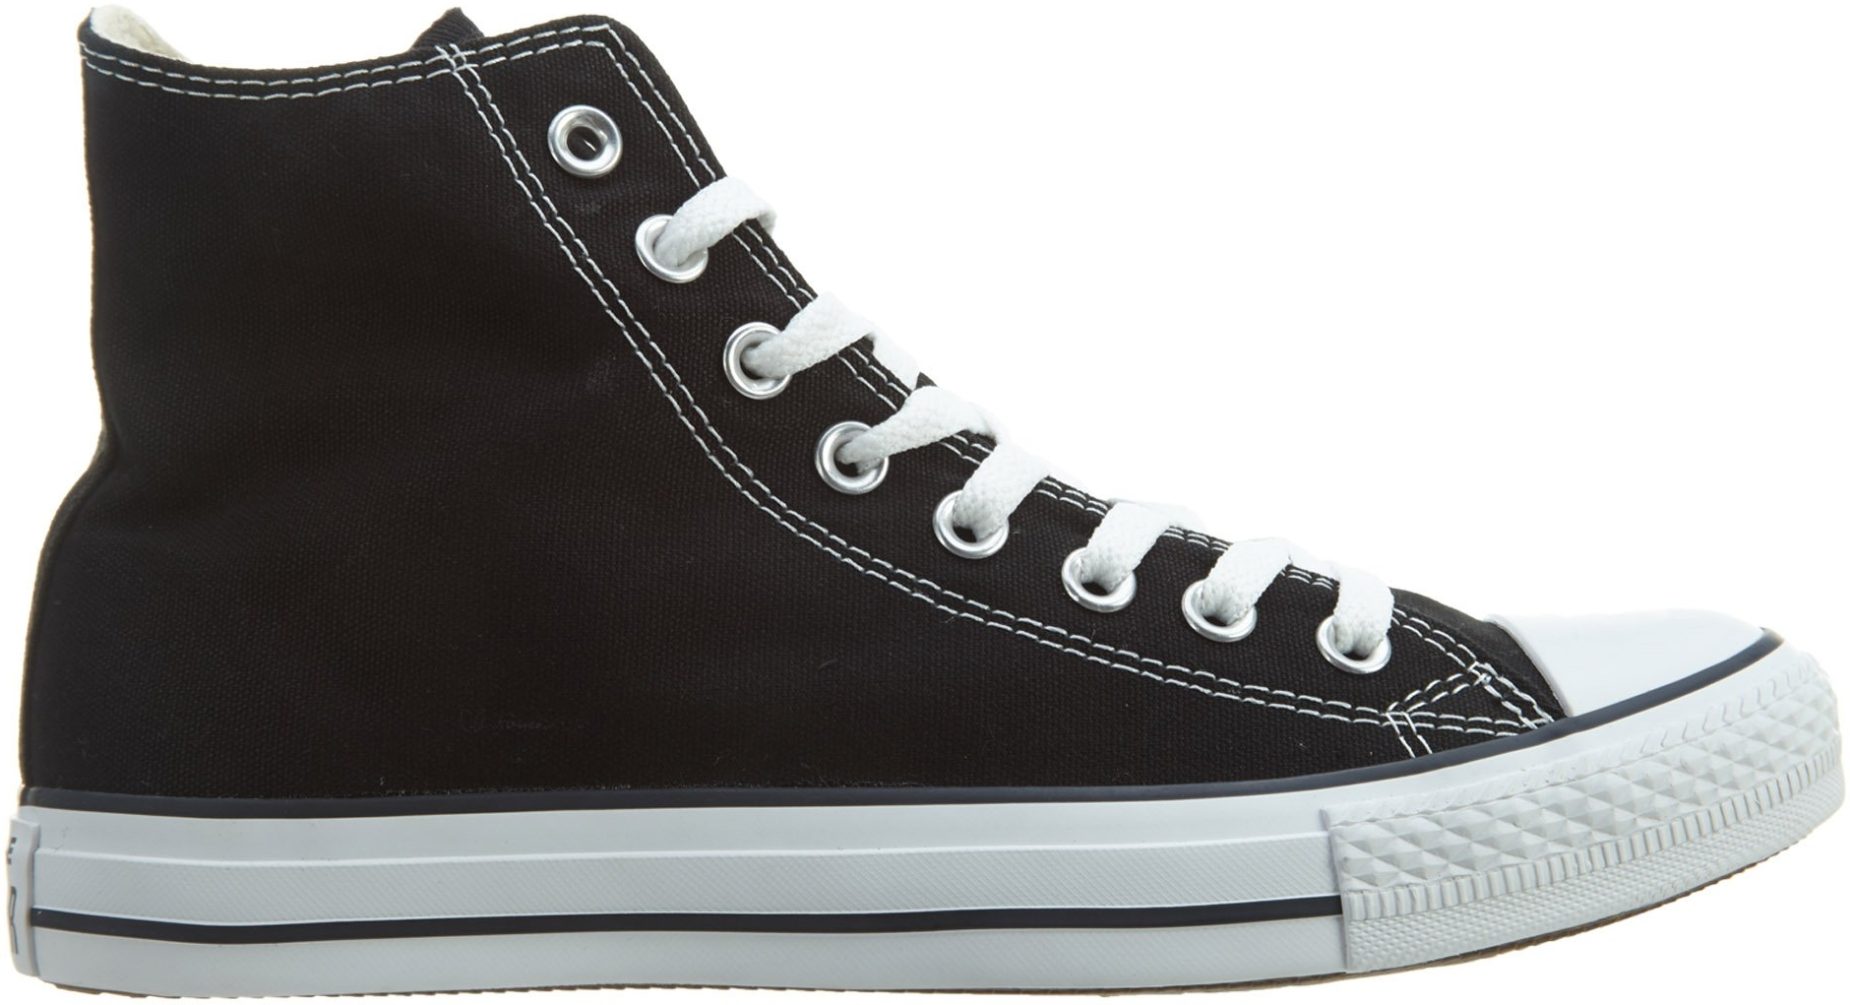 Converse Chuck Taylor All Star High Top sneakers in 20 colors ...